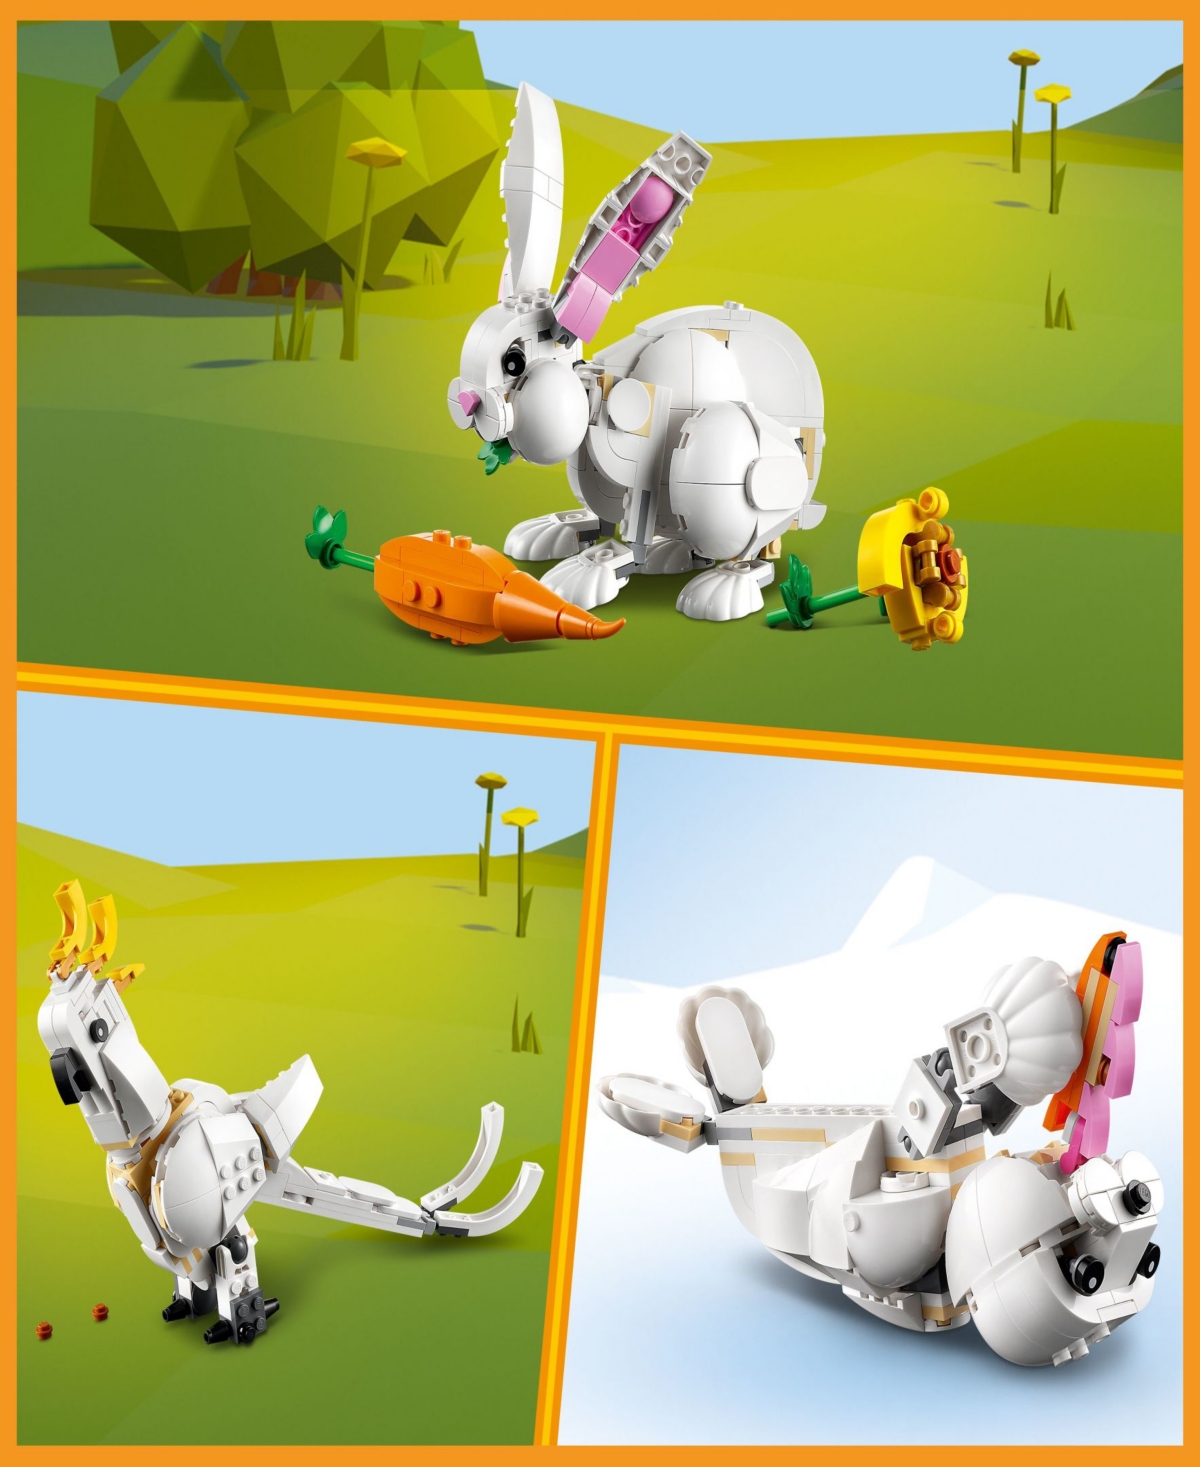 Shop Lego Creator 3-in-1 White Rabbit, Cockatoo And Seal 31133 Toy Building Set In Multicolor